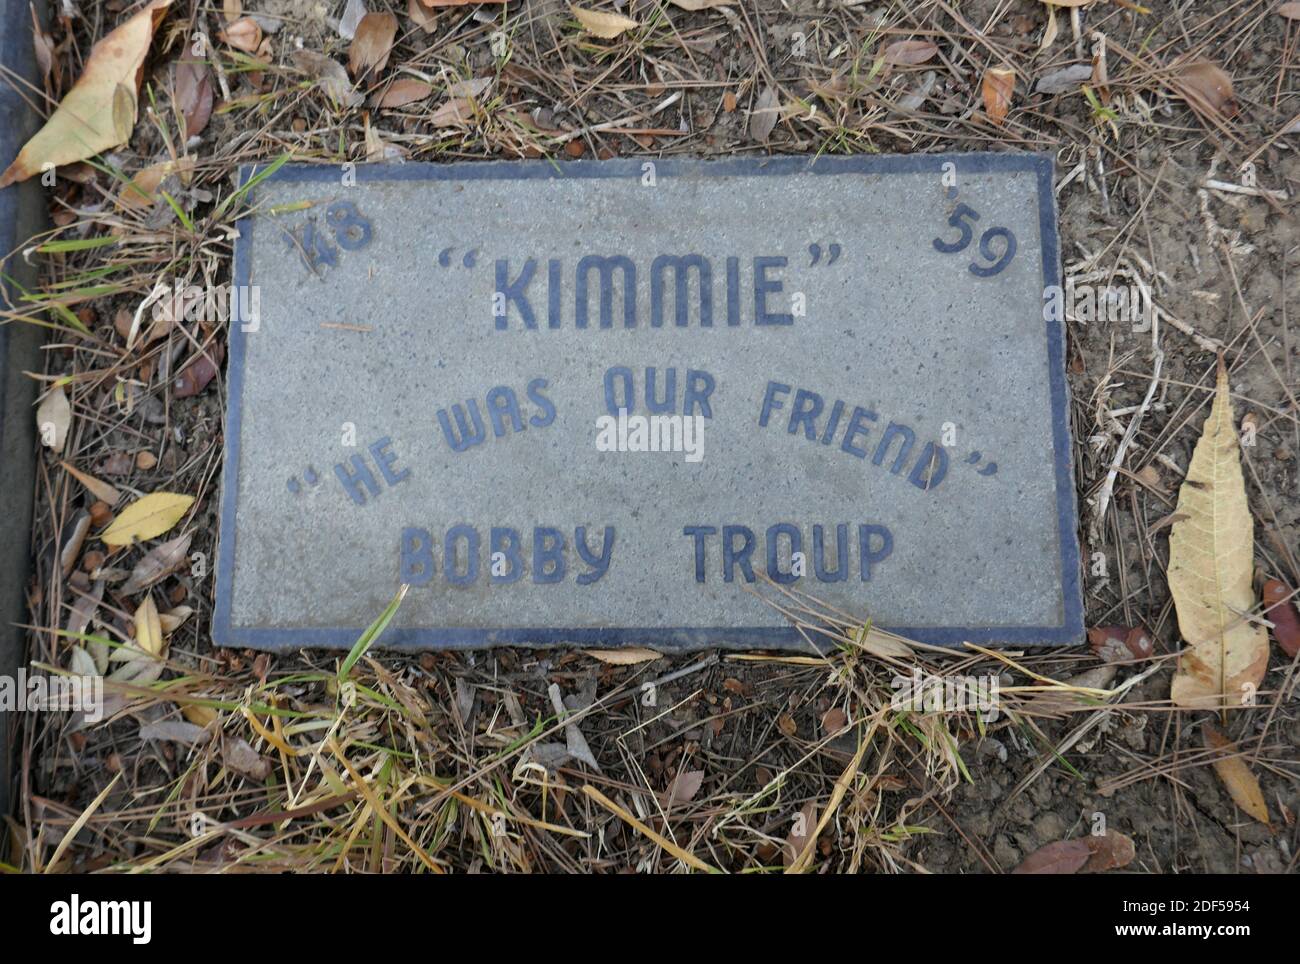 Gardena, California, USA 2nd December 2020 A general view of atmosphere of actor Bobby Troup's Pet Kimmie's Grave at Pet Haven Cemetery on December 2, 2020 at 18300 S. Figueroa Street in Gardena, California, USA. Photo by Barry King/Alamy Stock Photo Stock Photo